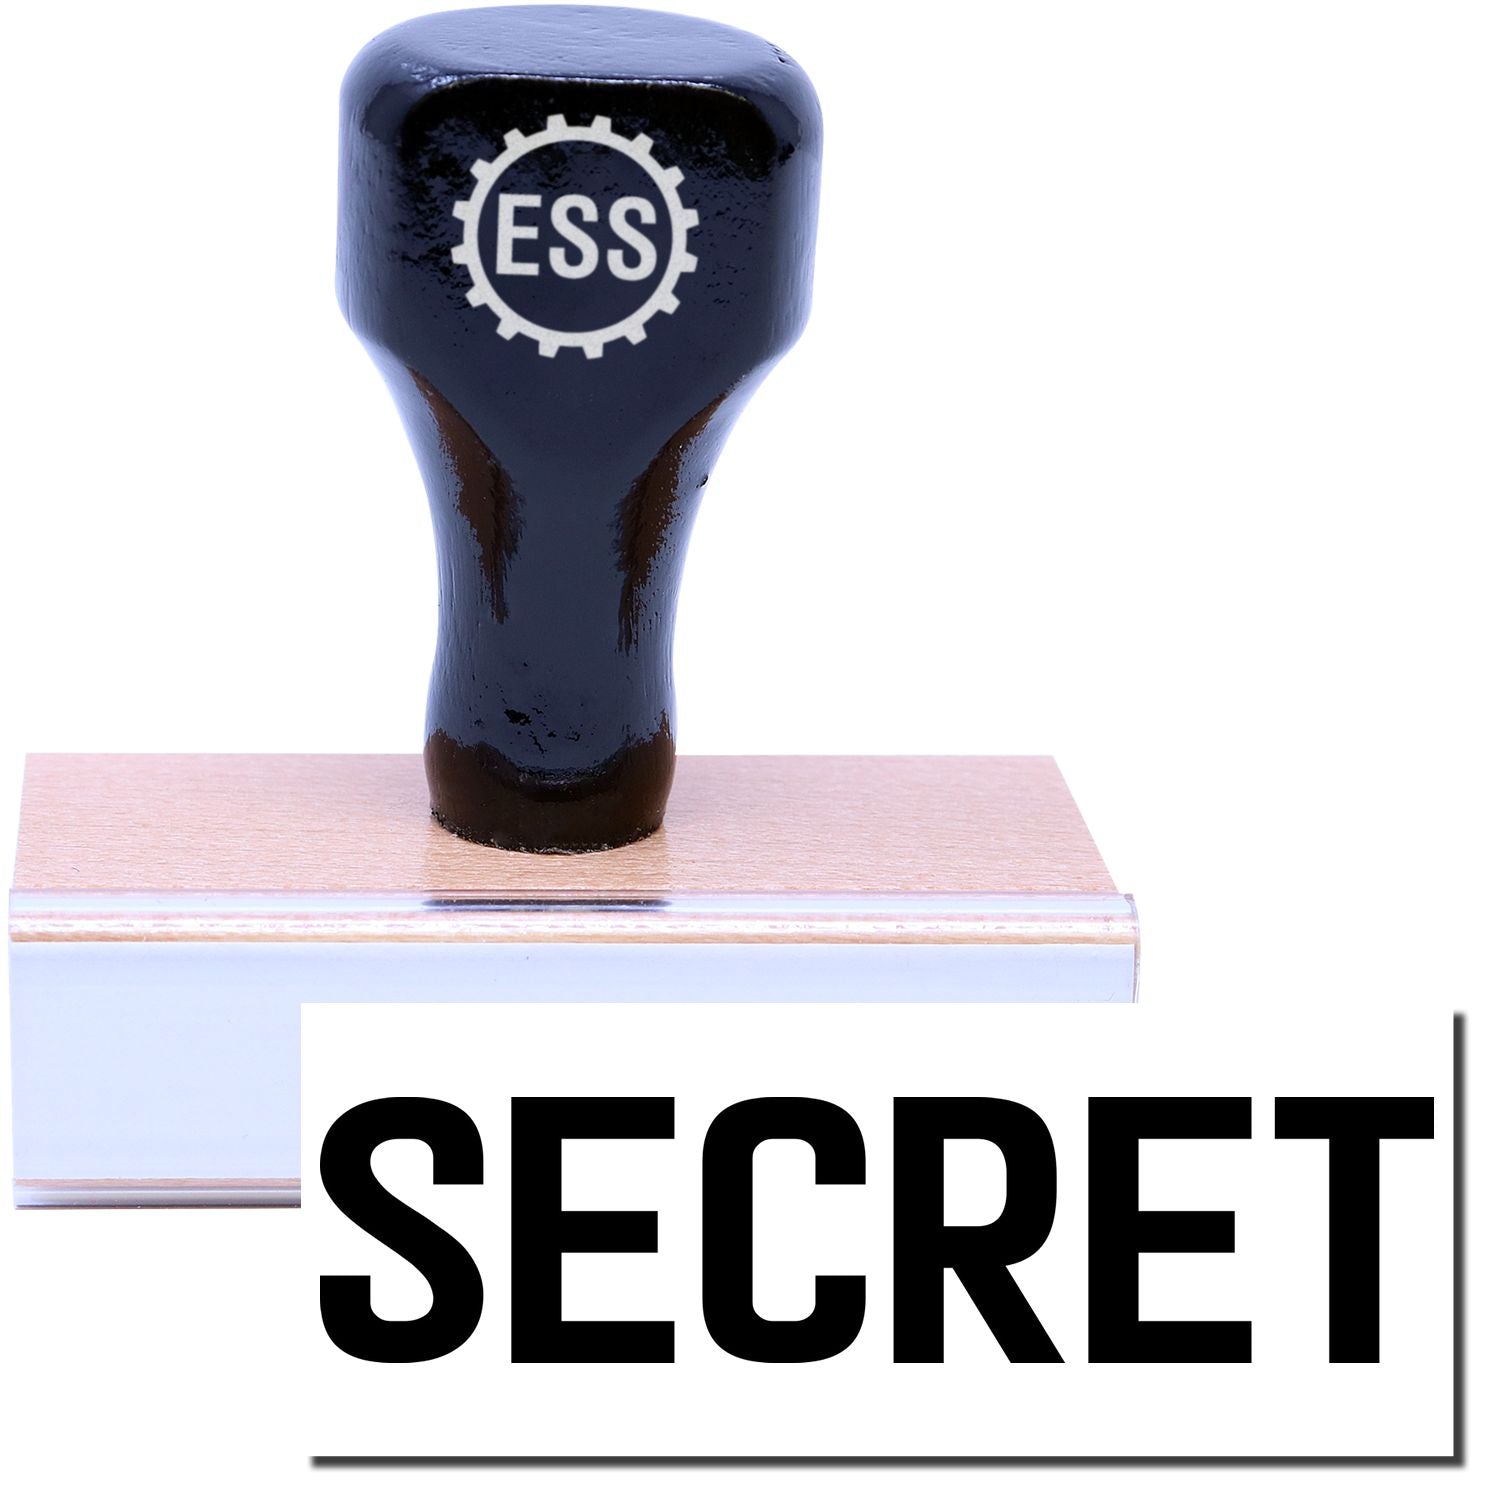 A stock office rubber stamp with a stamped image showing how the text "SECRET" is displayed after stamping.